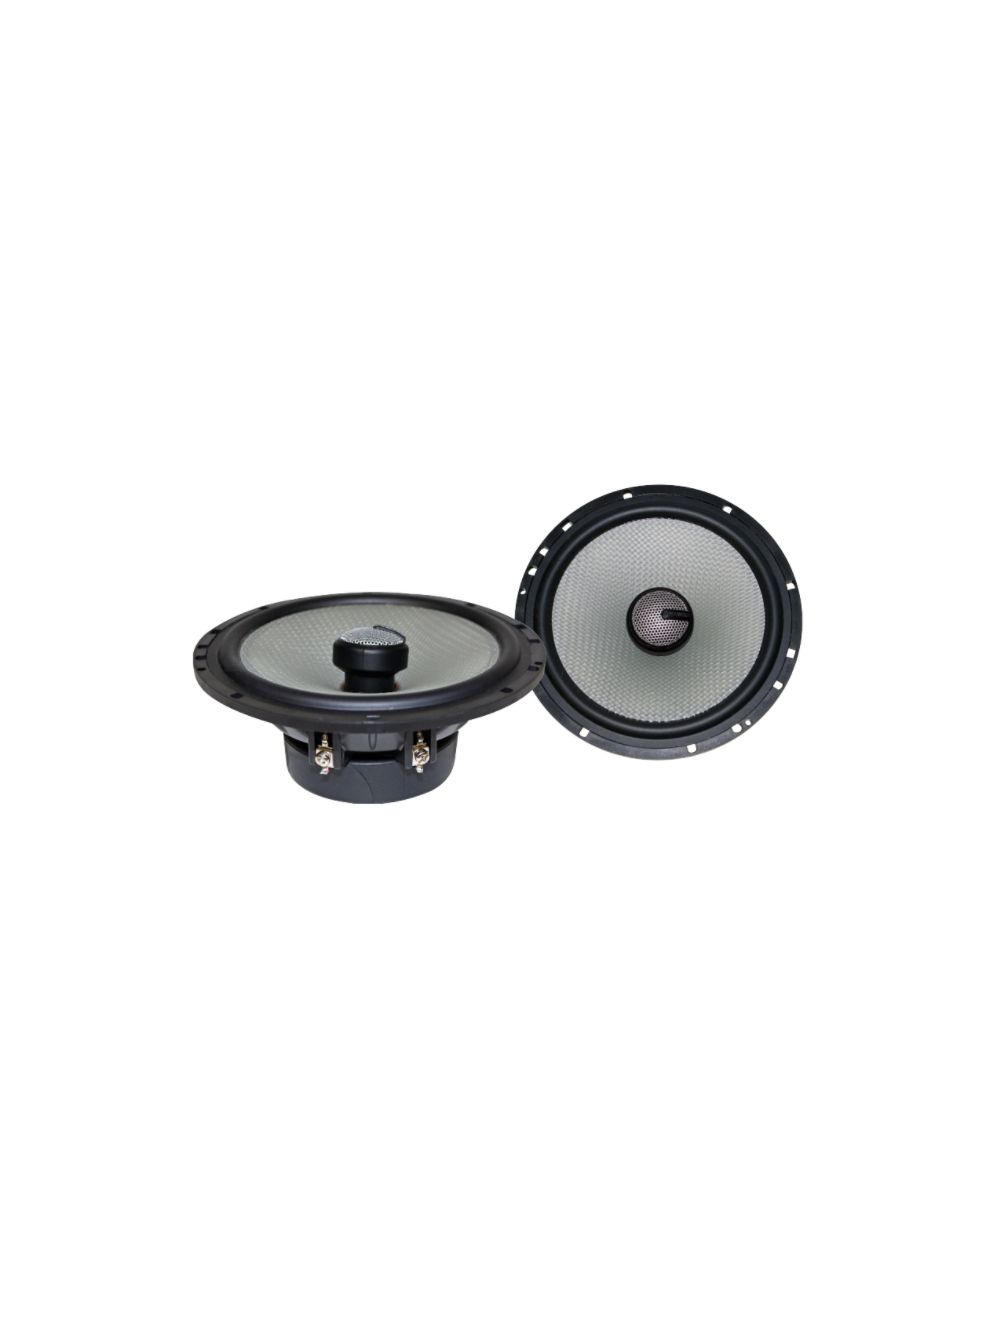 Car Speaker Size Replacement fits 2019 for GMC Sierra or Sierra Denali 1500 Limited Crew Cab (not amplified)